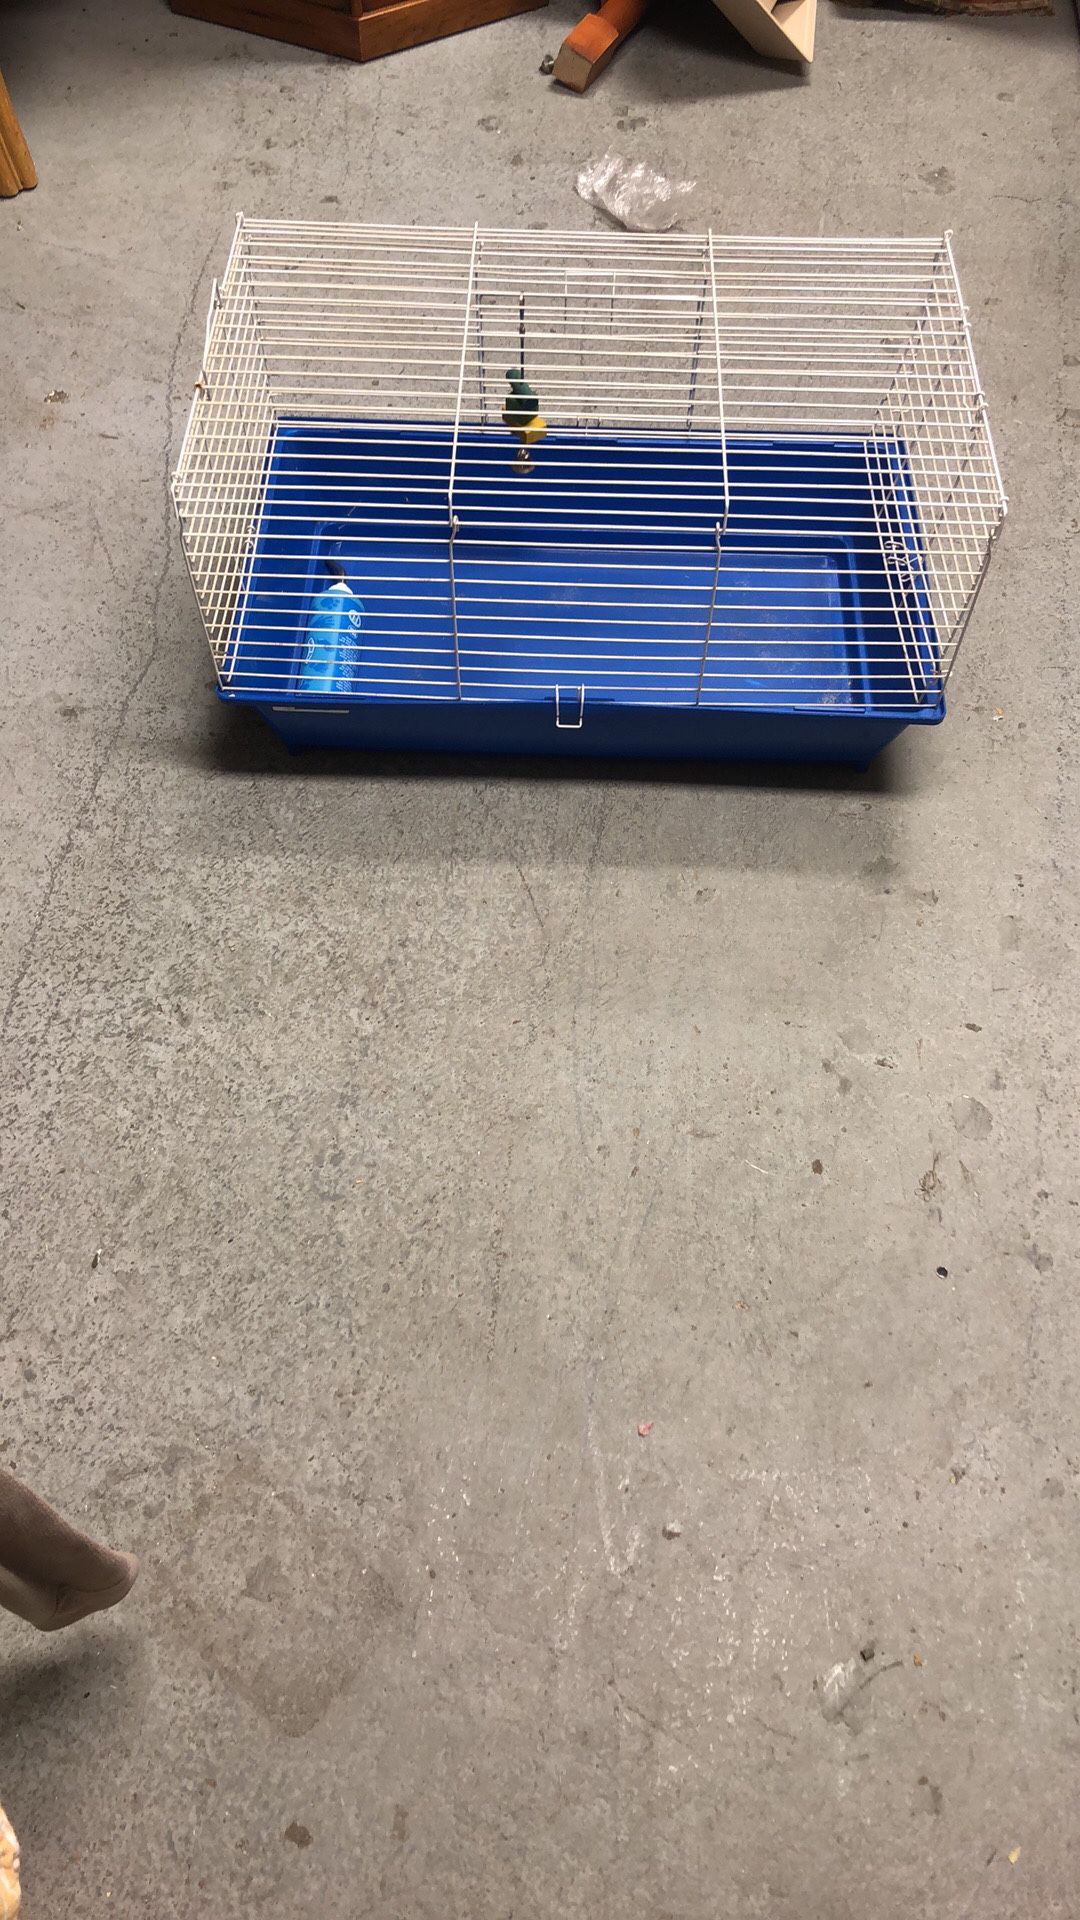  28”wx16”dx14”hHamster cage